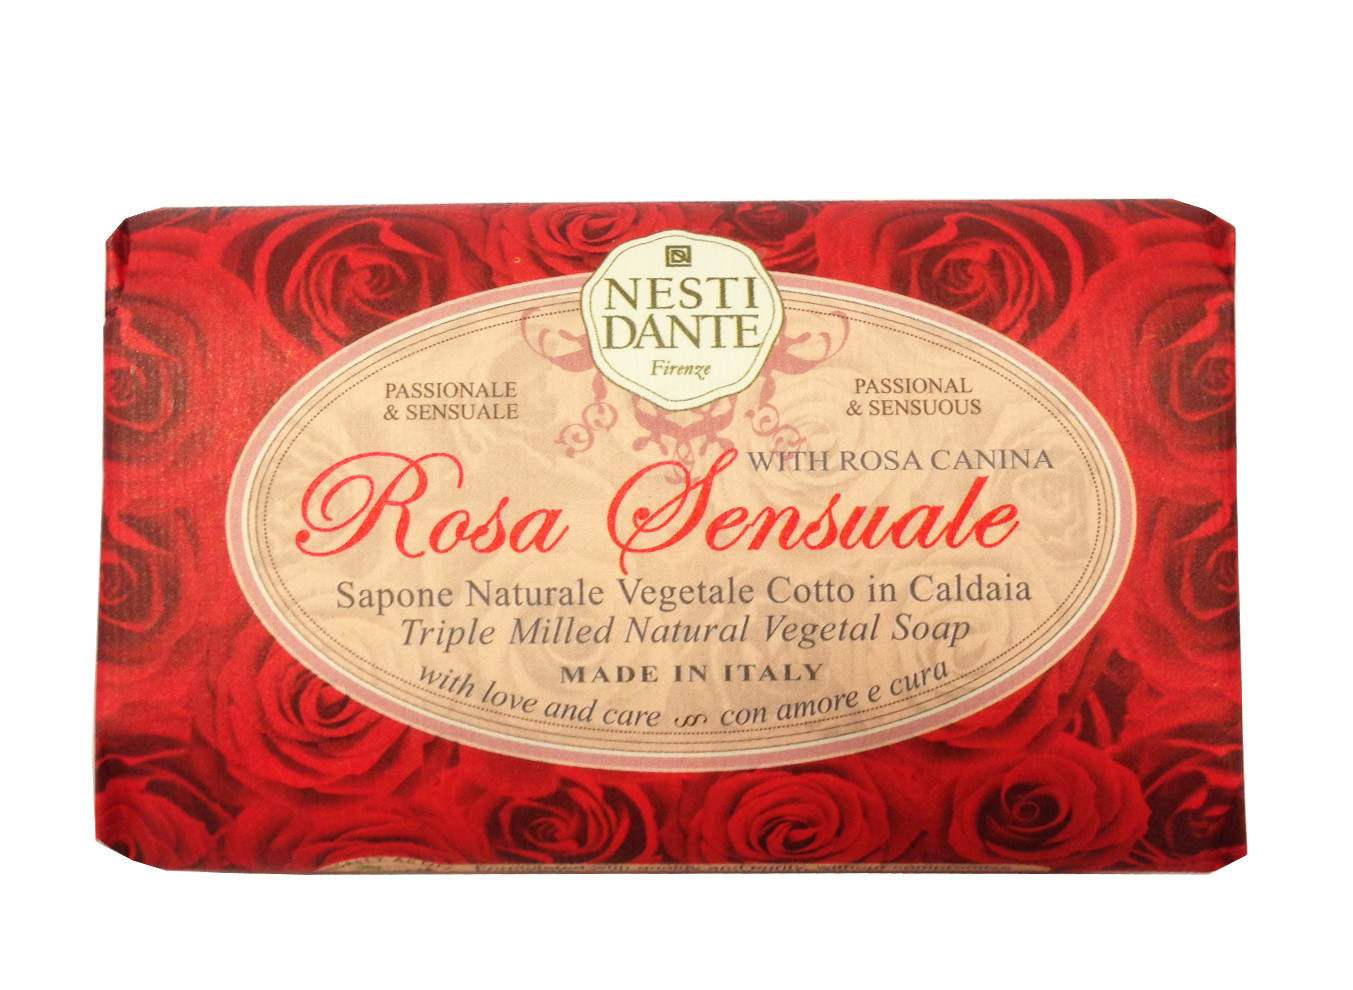 Le Rose - Sensuale, Rosso, large image number 0